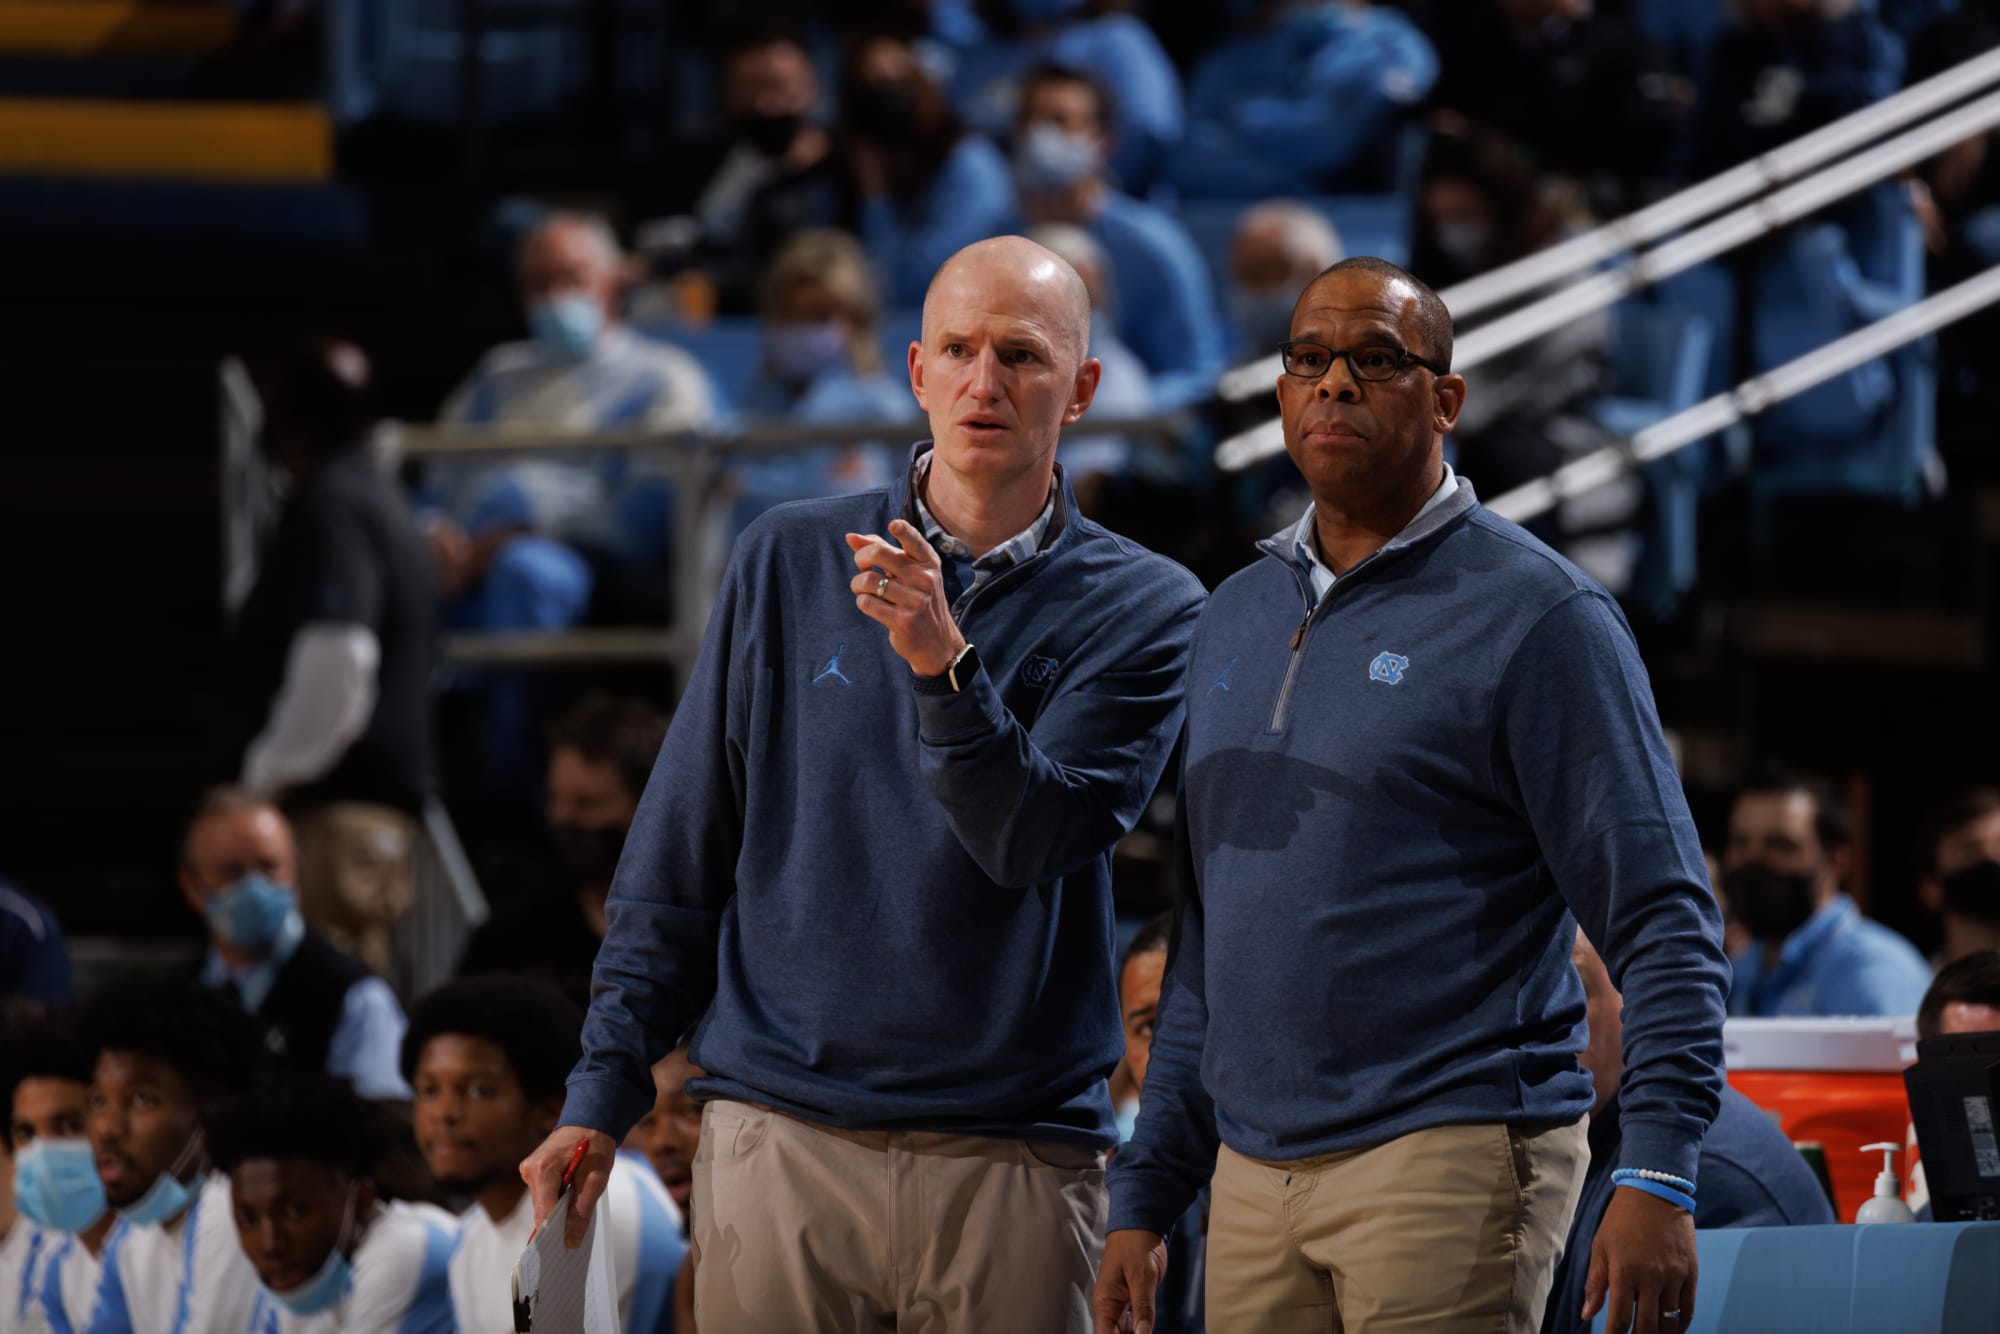 UNC Basketball Potential Transfer Schedules Official Visit